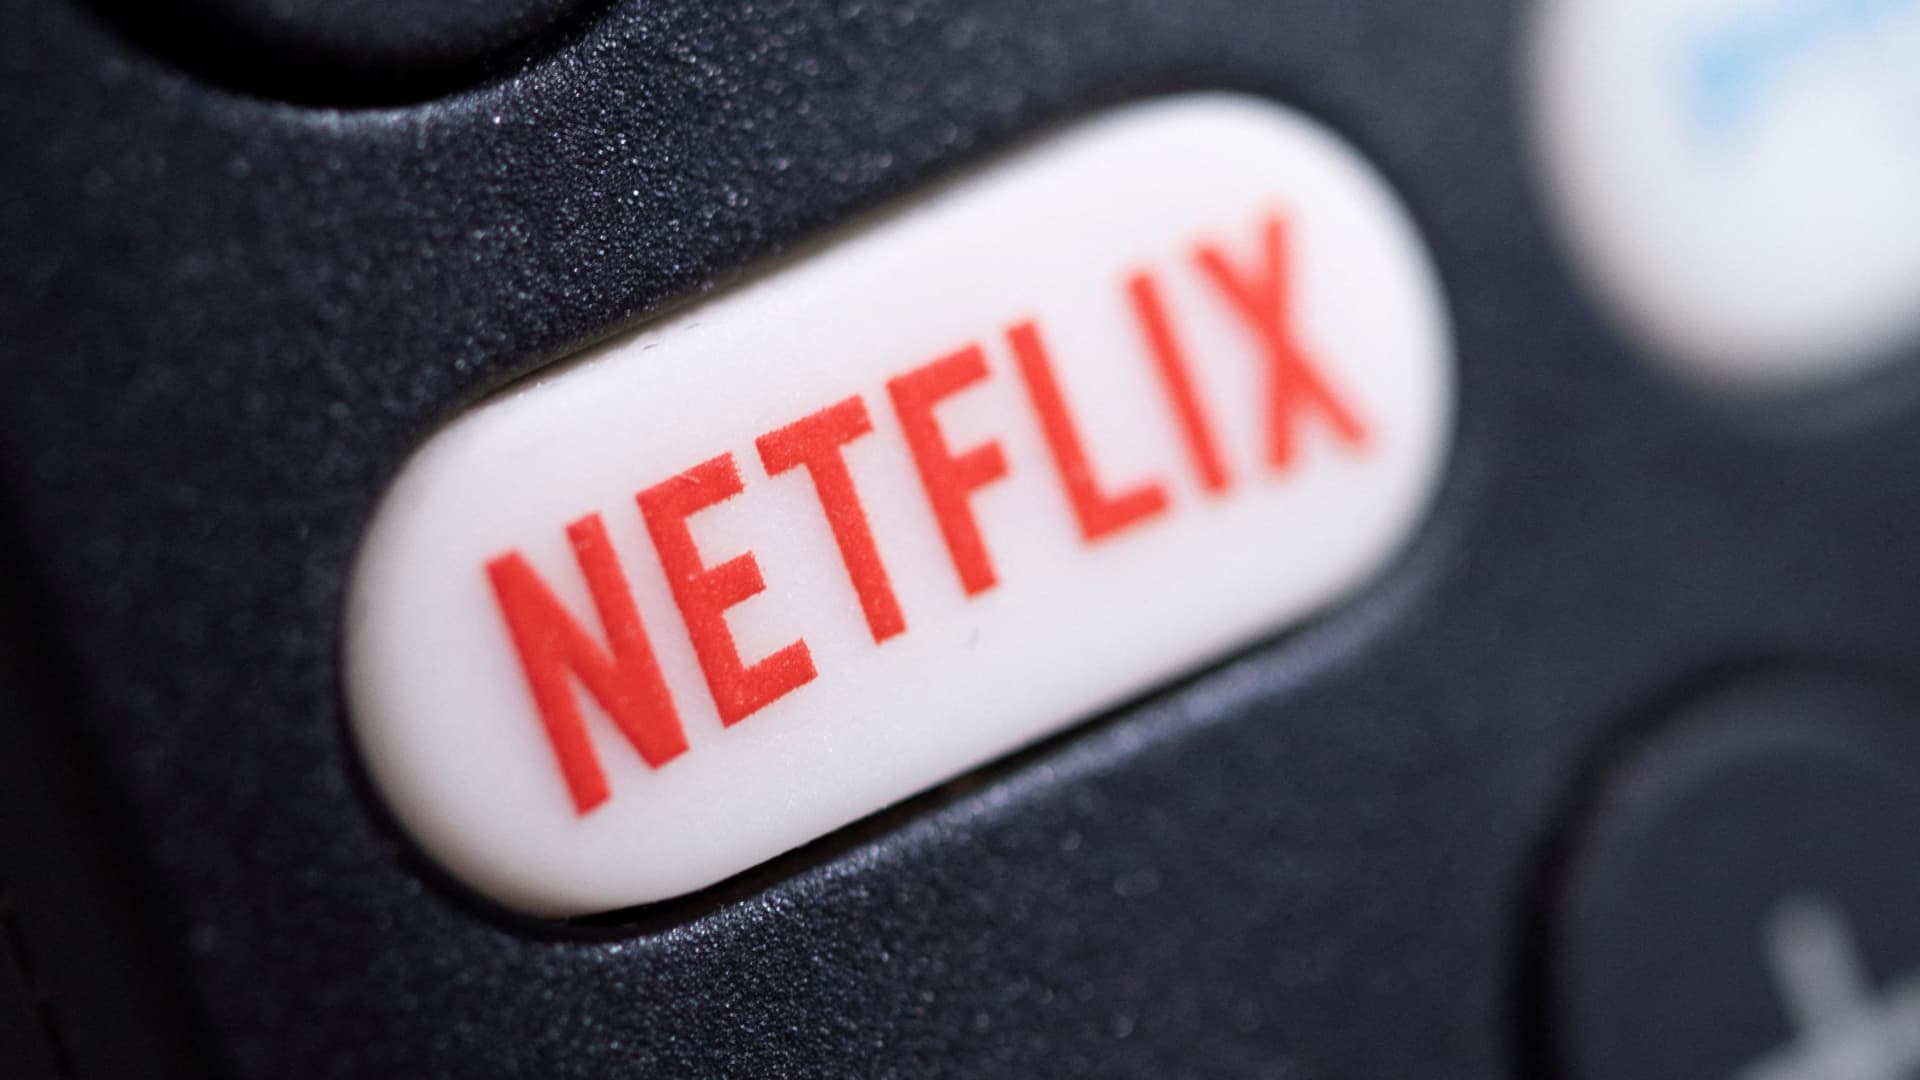 Goldman downgrades Netflix to sell as recession risk, rising competition threaten the stock